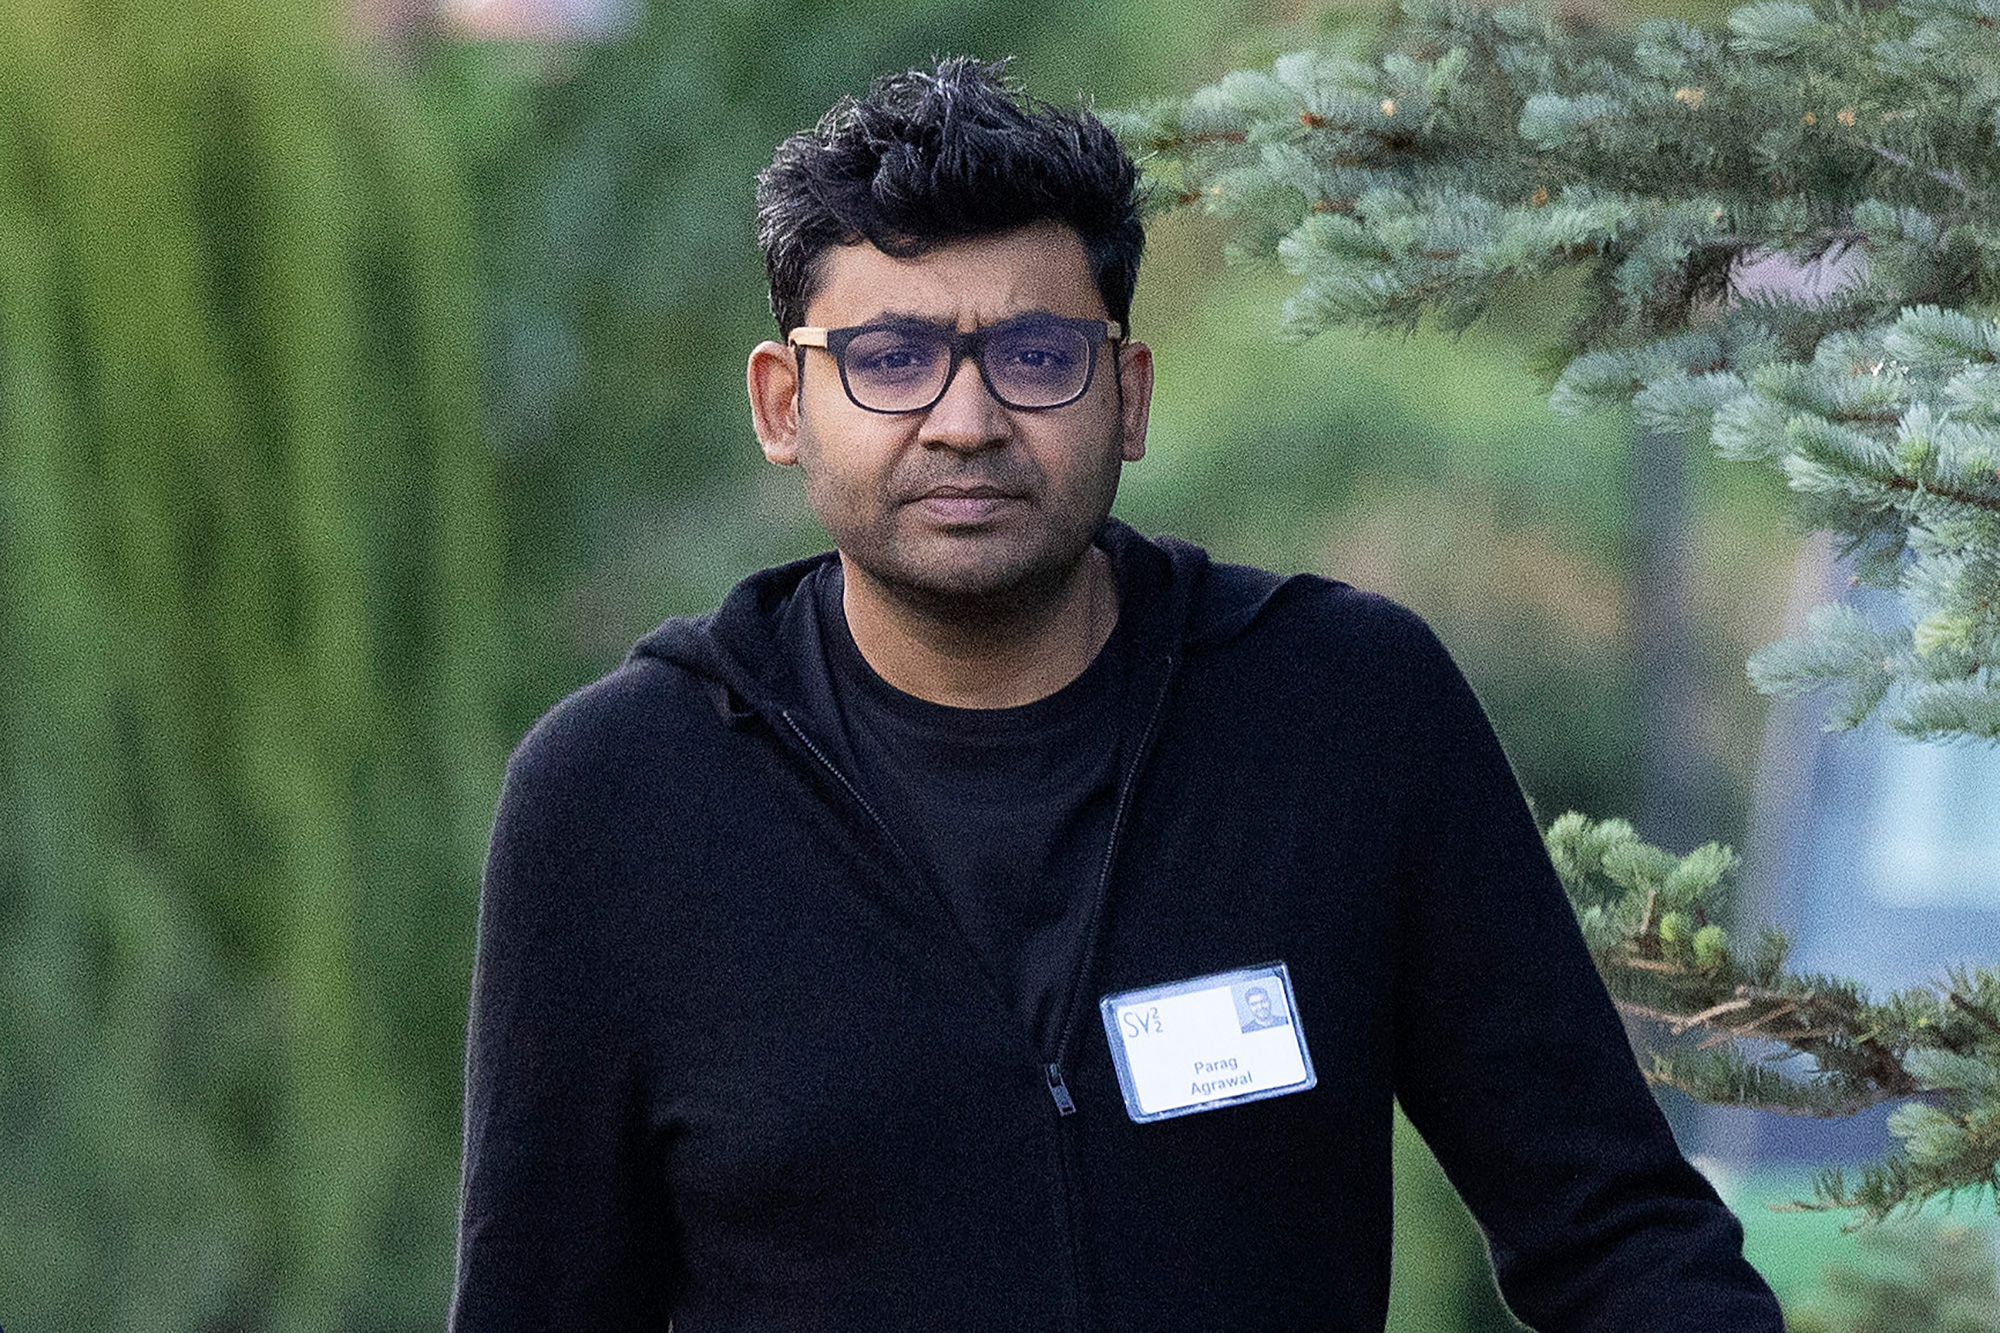 CEO of Twitter Parag Agrawal attends the Sun Valley Conference in Sun Valley, Idaho, on July 07, 2022.